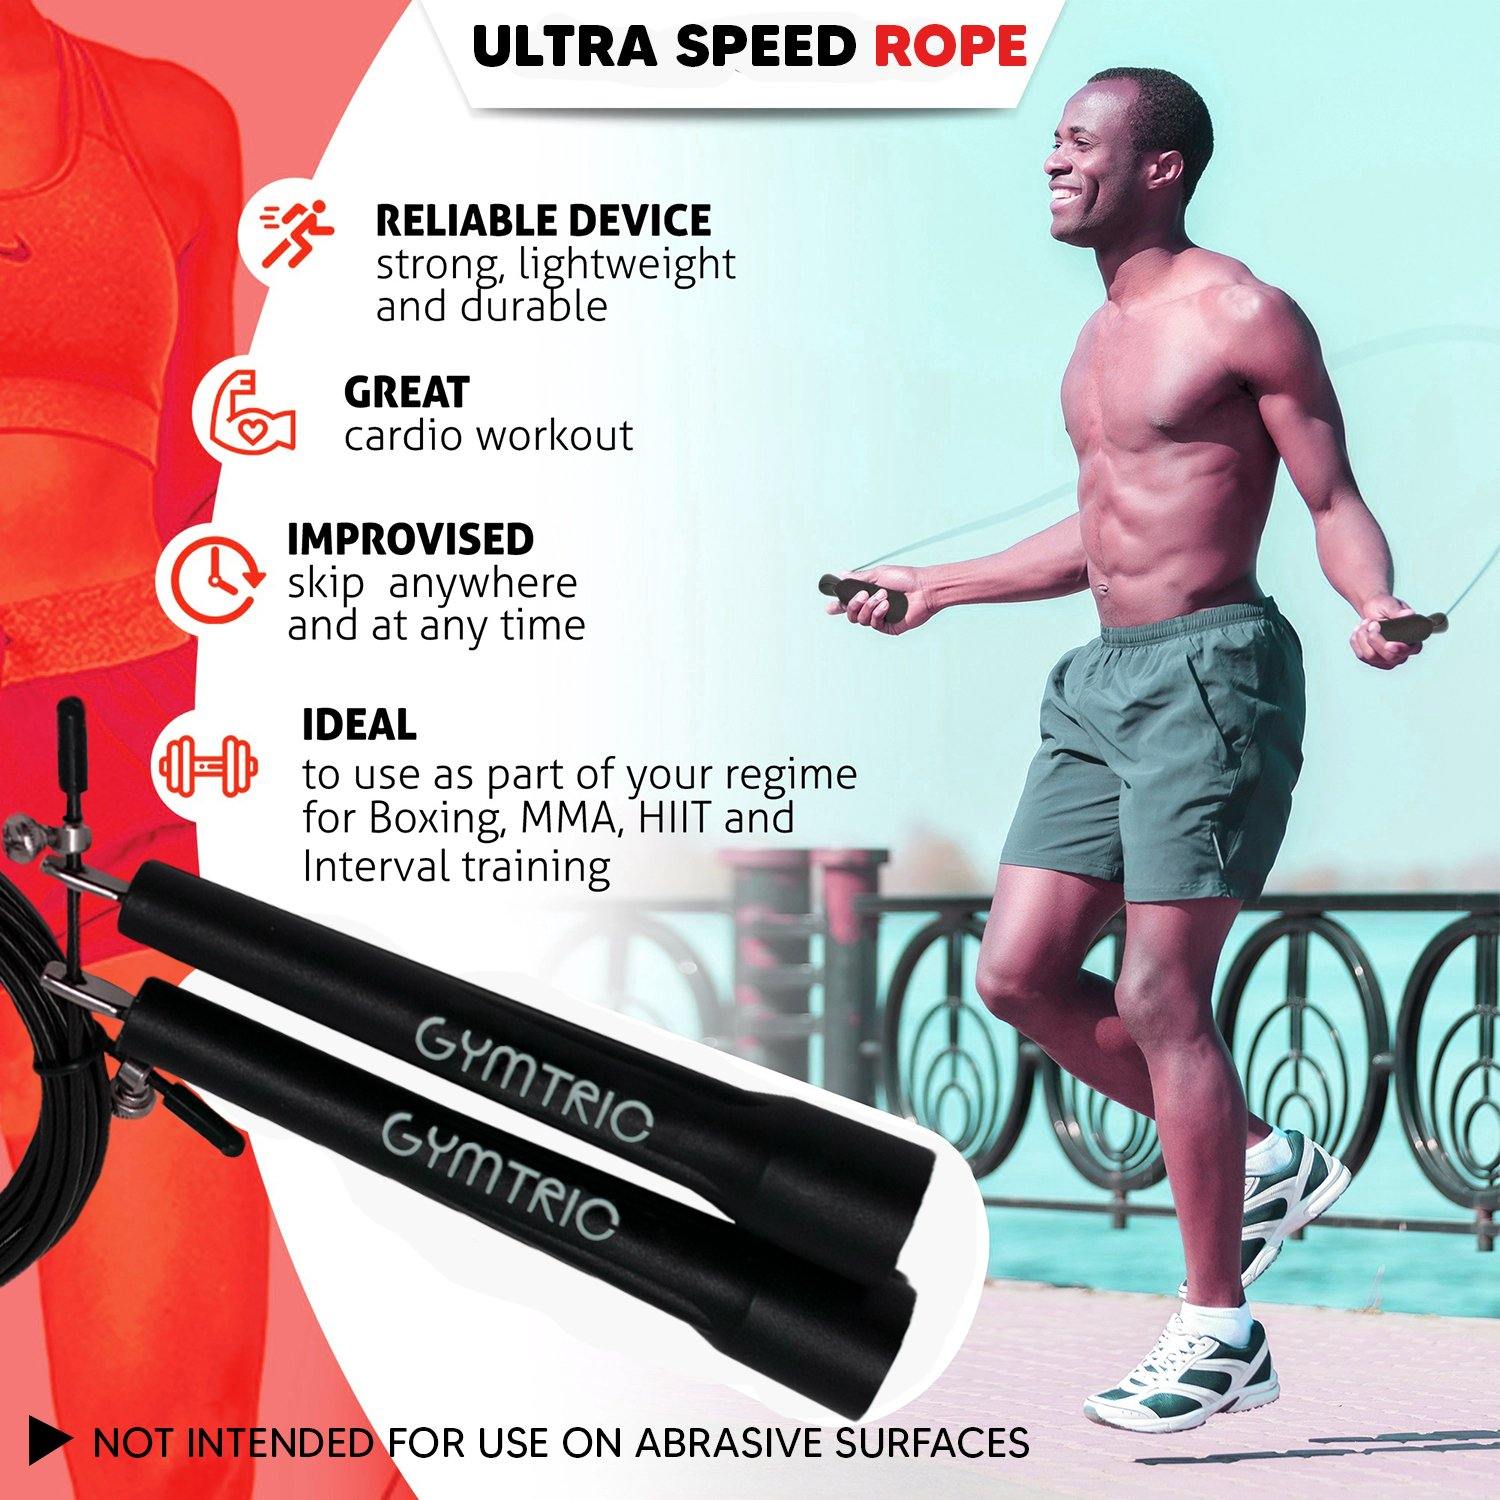 skipping ropes black, Ultra Speed Rope by RingMaster Sports,  Heavy Duty Leather Skipping Rope,  jump rope,  jumprope,  skipping for weight loss,  weighted skipping rope,  boxing skipping rope,  skipping good for weight loss,  weighted jump rope,  speed rope,  best jump rope,  skipping exercise,  skipping rope for weight loss,  jumping rope exercise,  best skipping rope,  best jump rope for beginners,  Ringmaster Sports Head guard,  Ringmaster Sports Equipment,  Ringmaster boxing Equipment